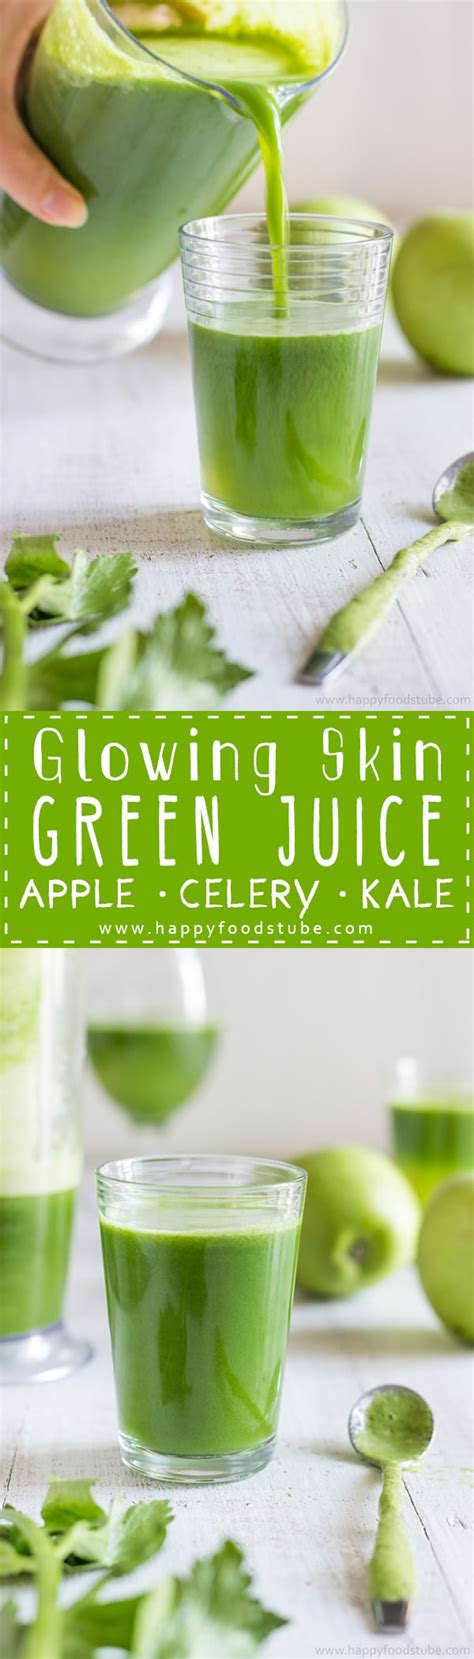 We have cultivated some juice diets and detoxes ideas here for you that will be a quick jump start for shedding those pounds right consuming juices lets your body easily absorb the nutrients (vitamins, minerals and enzymes) required to live a healthy life and it removes all the. Glowing Skin Green Juice Recipe - Happy Foods Tube